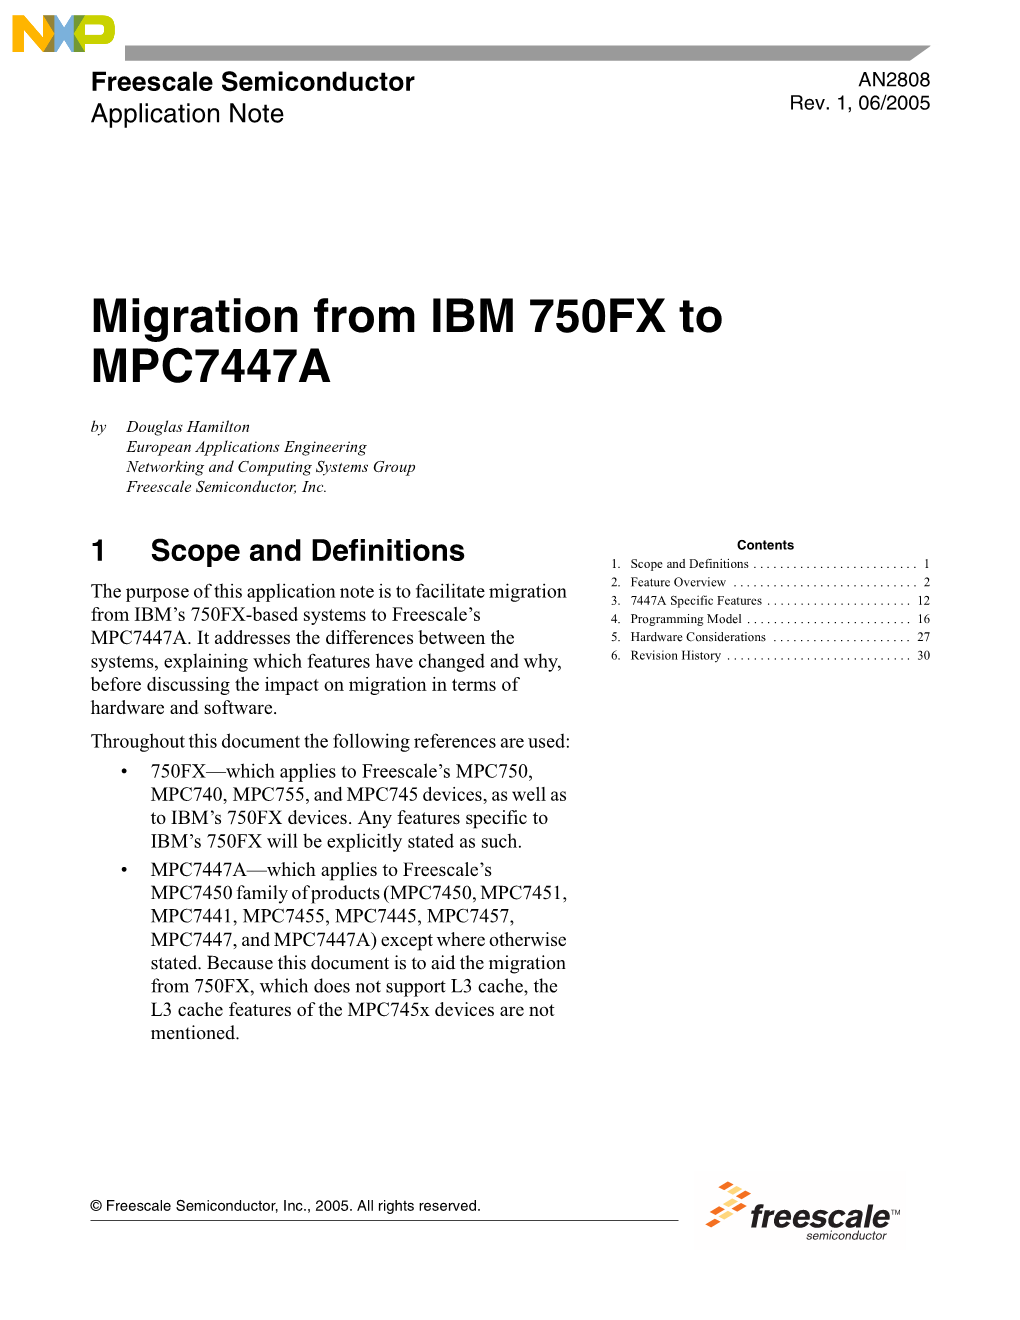 Migration from IBM 750FX to MPC7447A by Douglas Hamilton European Applications Engineering Networking and Computing Systems Group Freescale Semiconductor, Inc